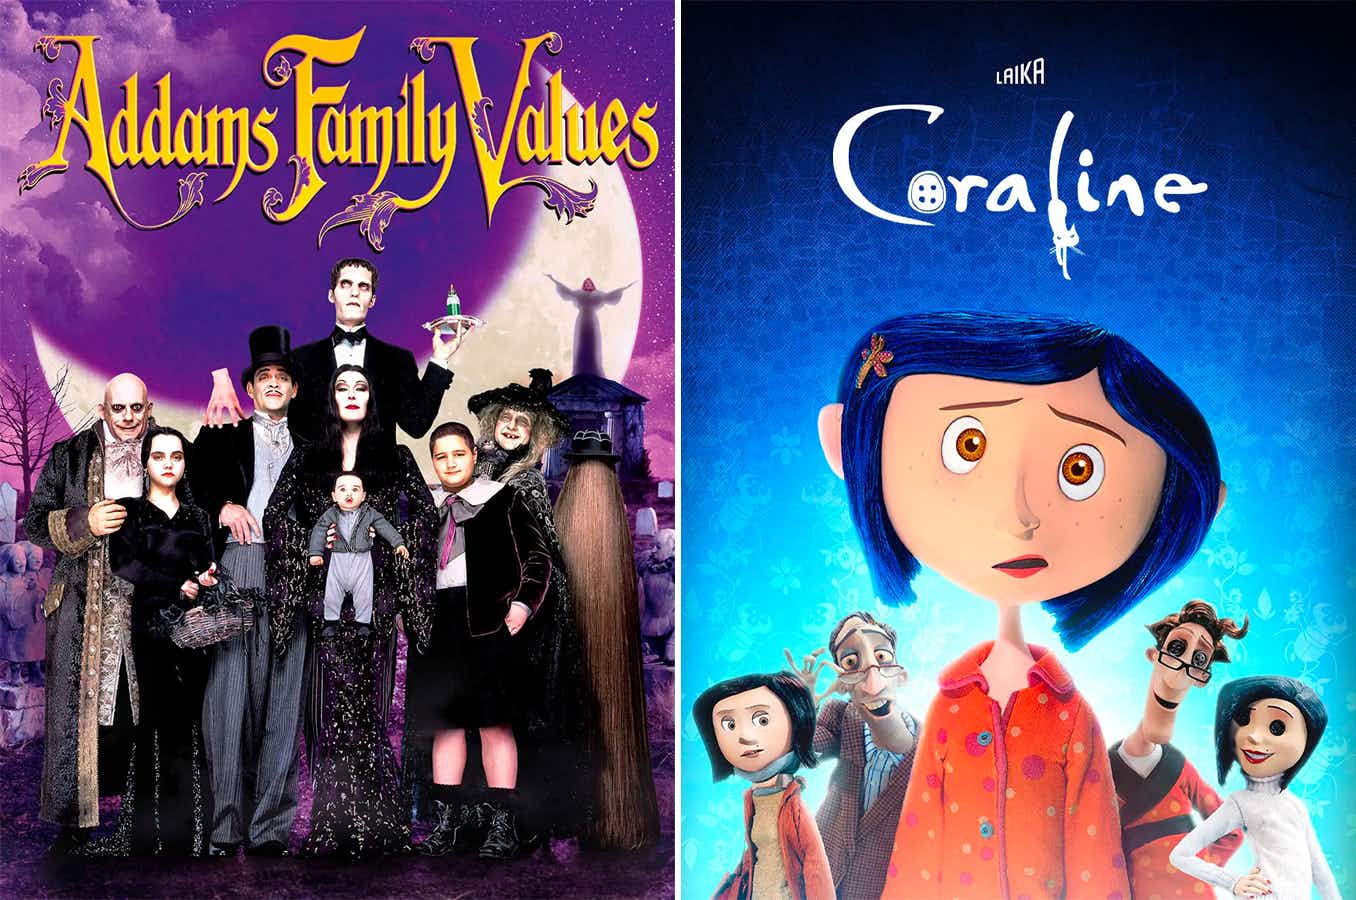 The covers for Addams Family Values and Coraline next to each other.